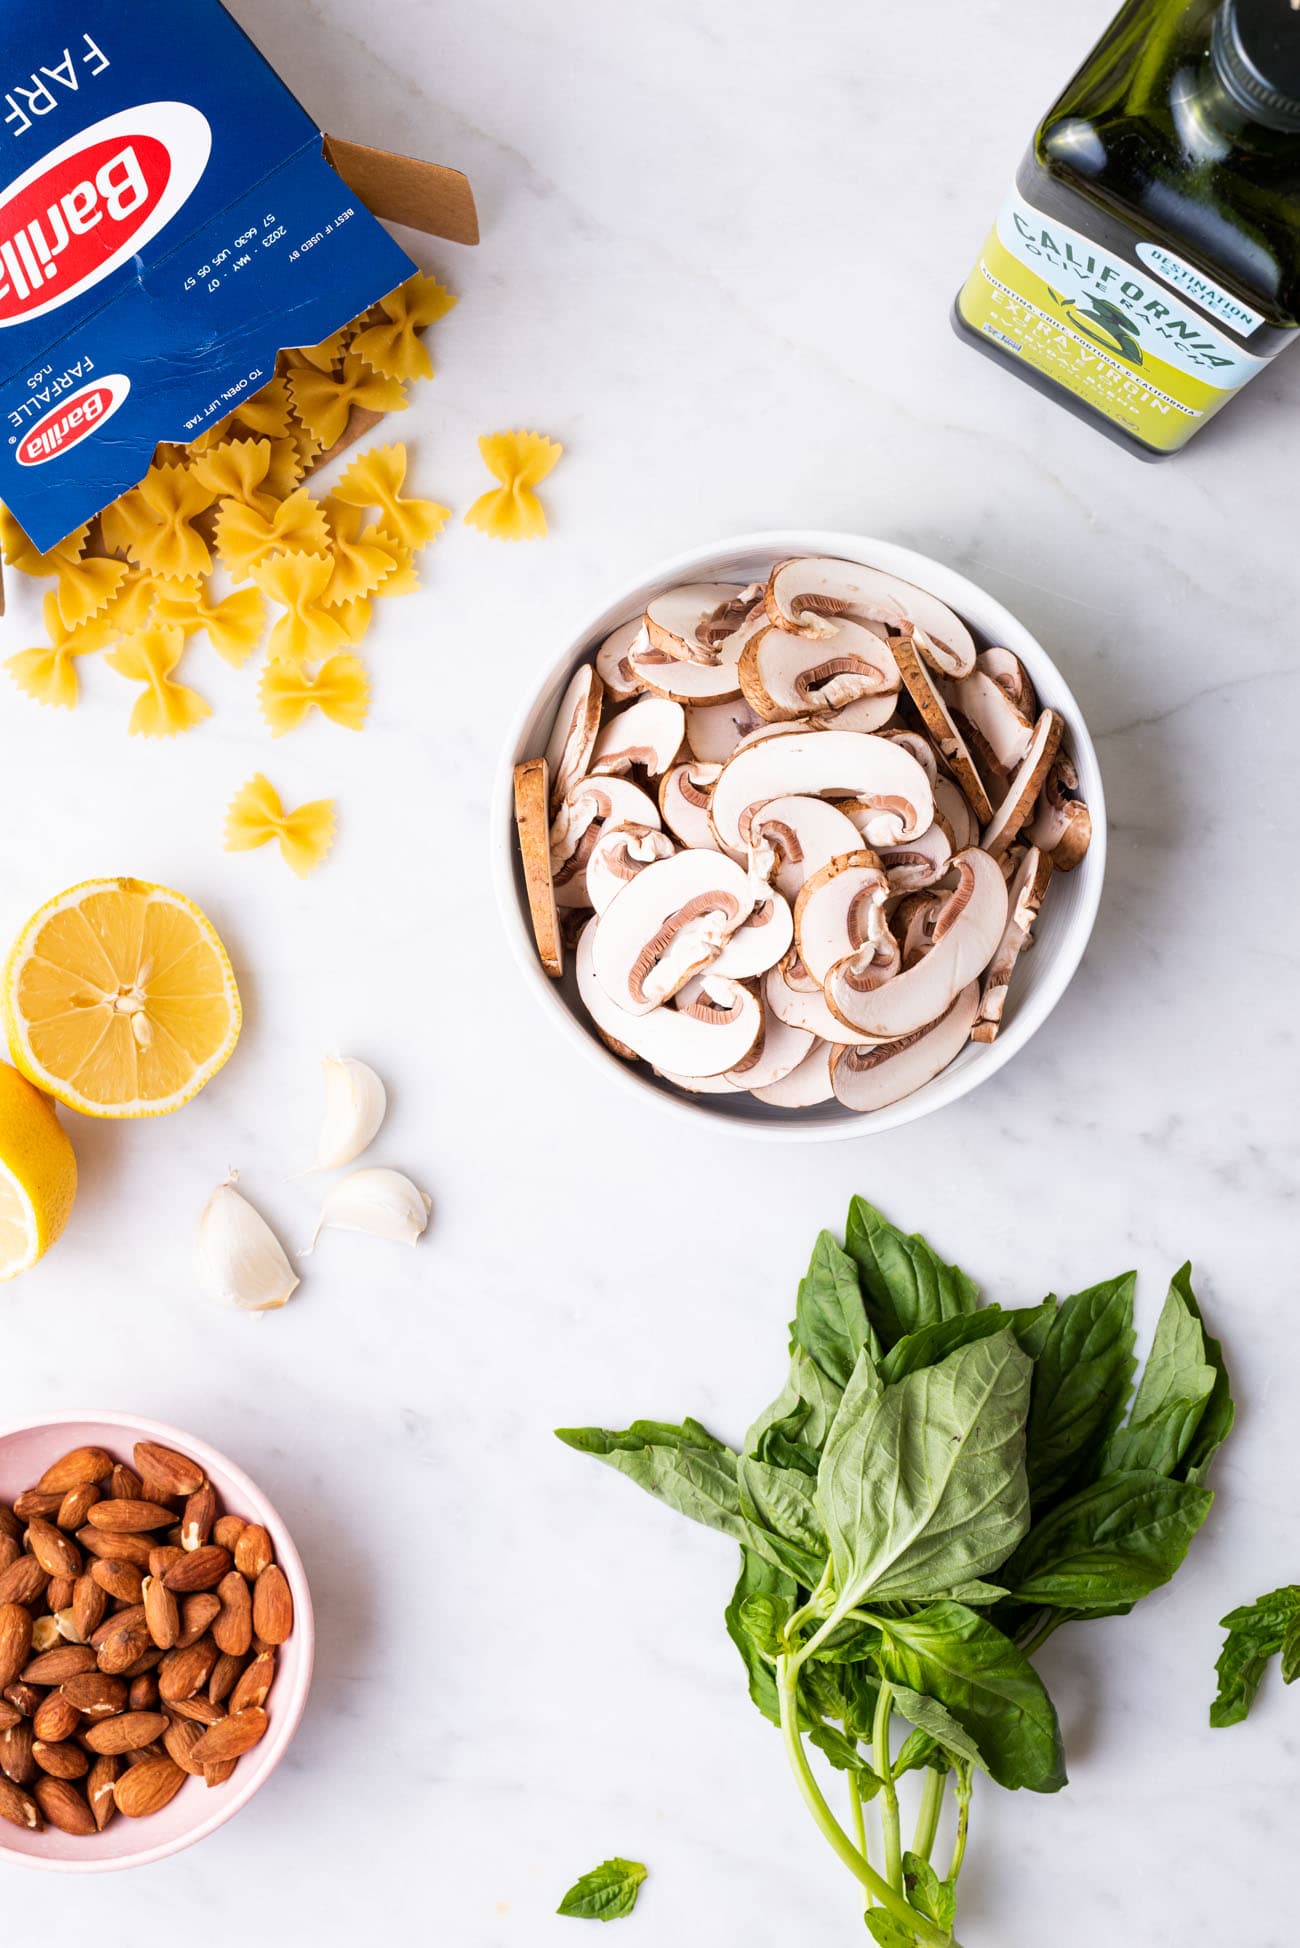 Ingredients gathered on a marble counter: Barilla farfalle, olive oil, mushrooms, garlic, almonds, and basil.